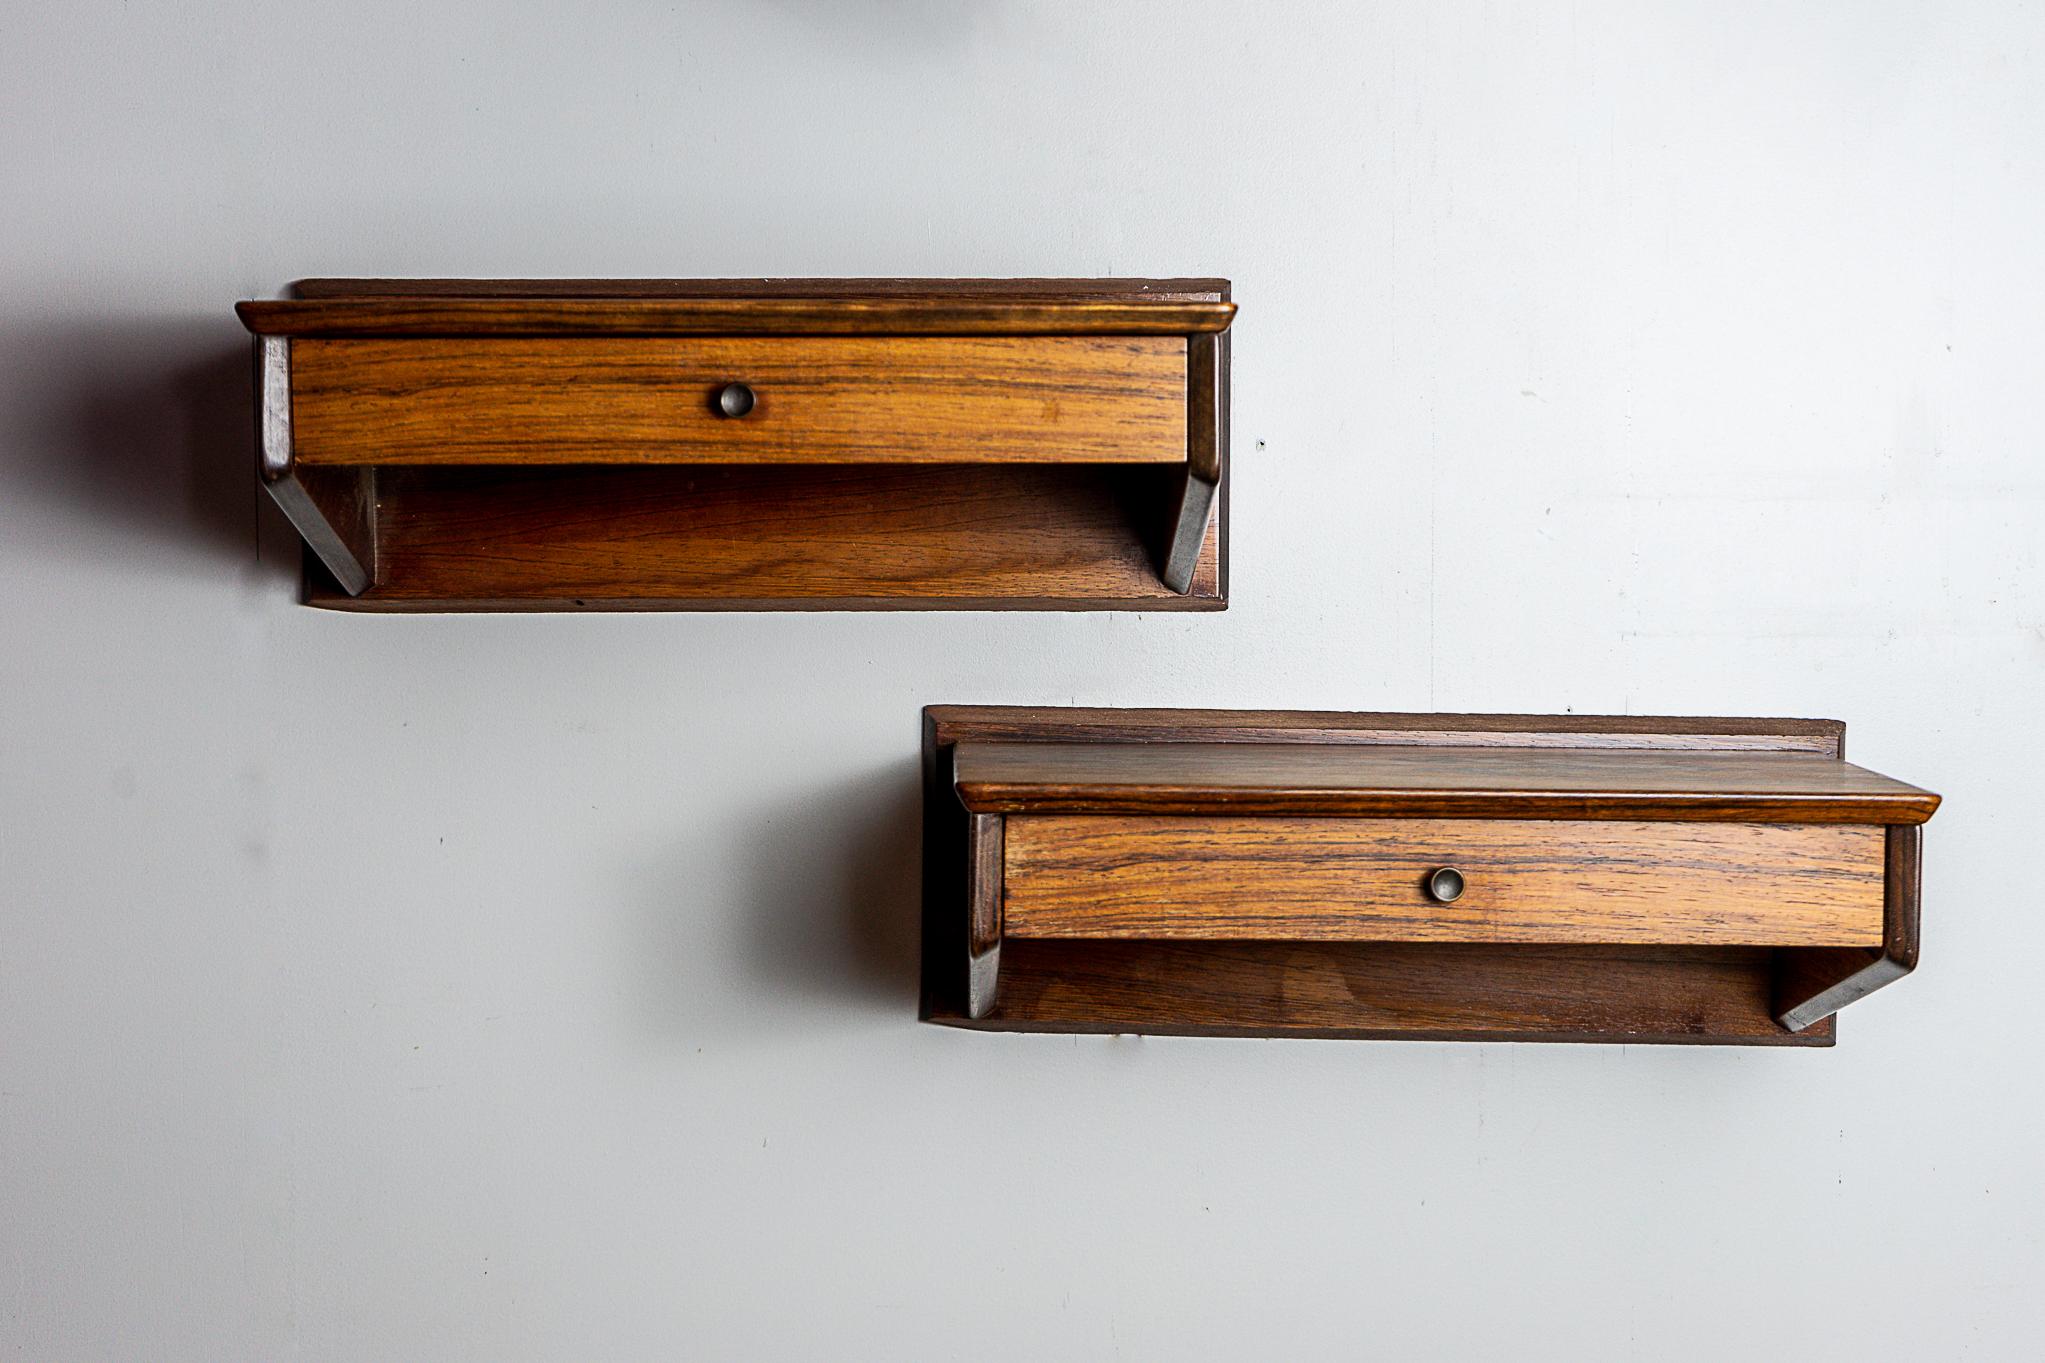 Rosewood Danish bedsides, circa 1960's. Beautifully veneered wall mount nightstands for sleek small spaces. Slim profile, dovetailed drawers, pure elegance! 

Unrestored item with option to purchase in restored condition for an additional $150 USD.